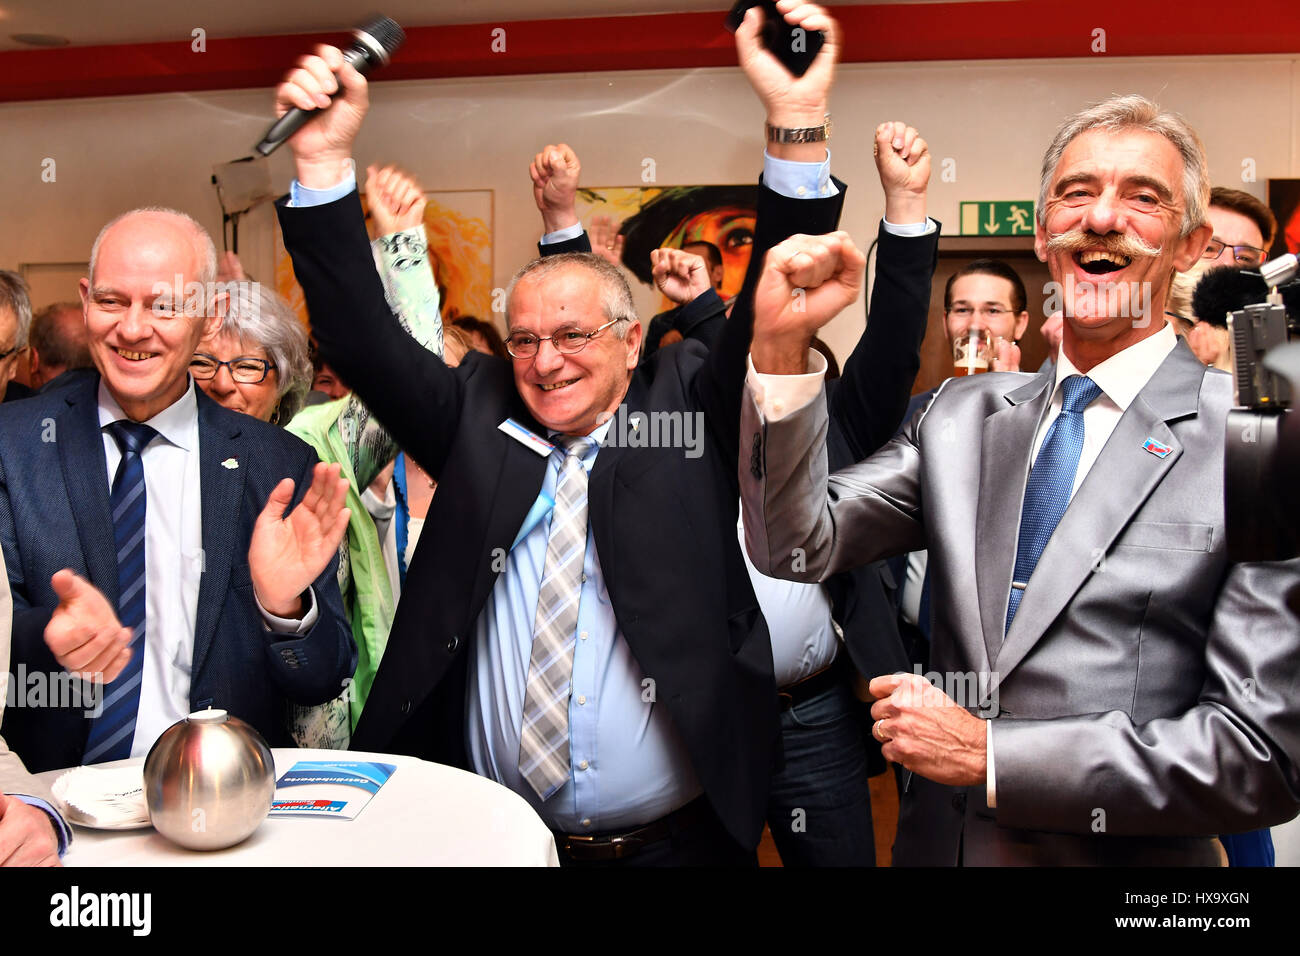 Voelklingen, Germany. 26th Mar, 2017. Rolf Mueller (L-R), main candidate for the Alternative for Germany (AfD) political party, celebrates with state-level party manager Dieter Mueller and Uwe Junge, AfD chairman in the German state Rhineland-Palatinate, as the first results come in after the German state of Saarland's parliamentary elections in Voelklingen, Germany, 26 March 2017. Photo: Harald Tittel/dpa/Alamy Live News Stock Photo